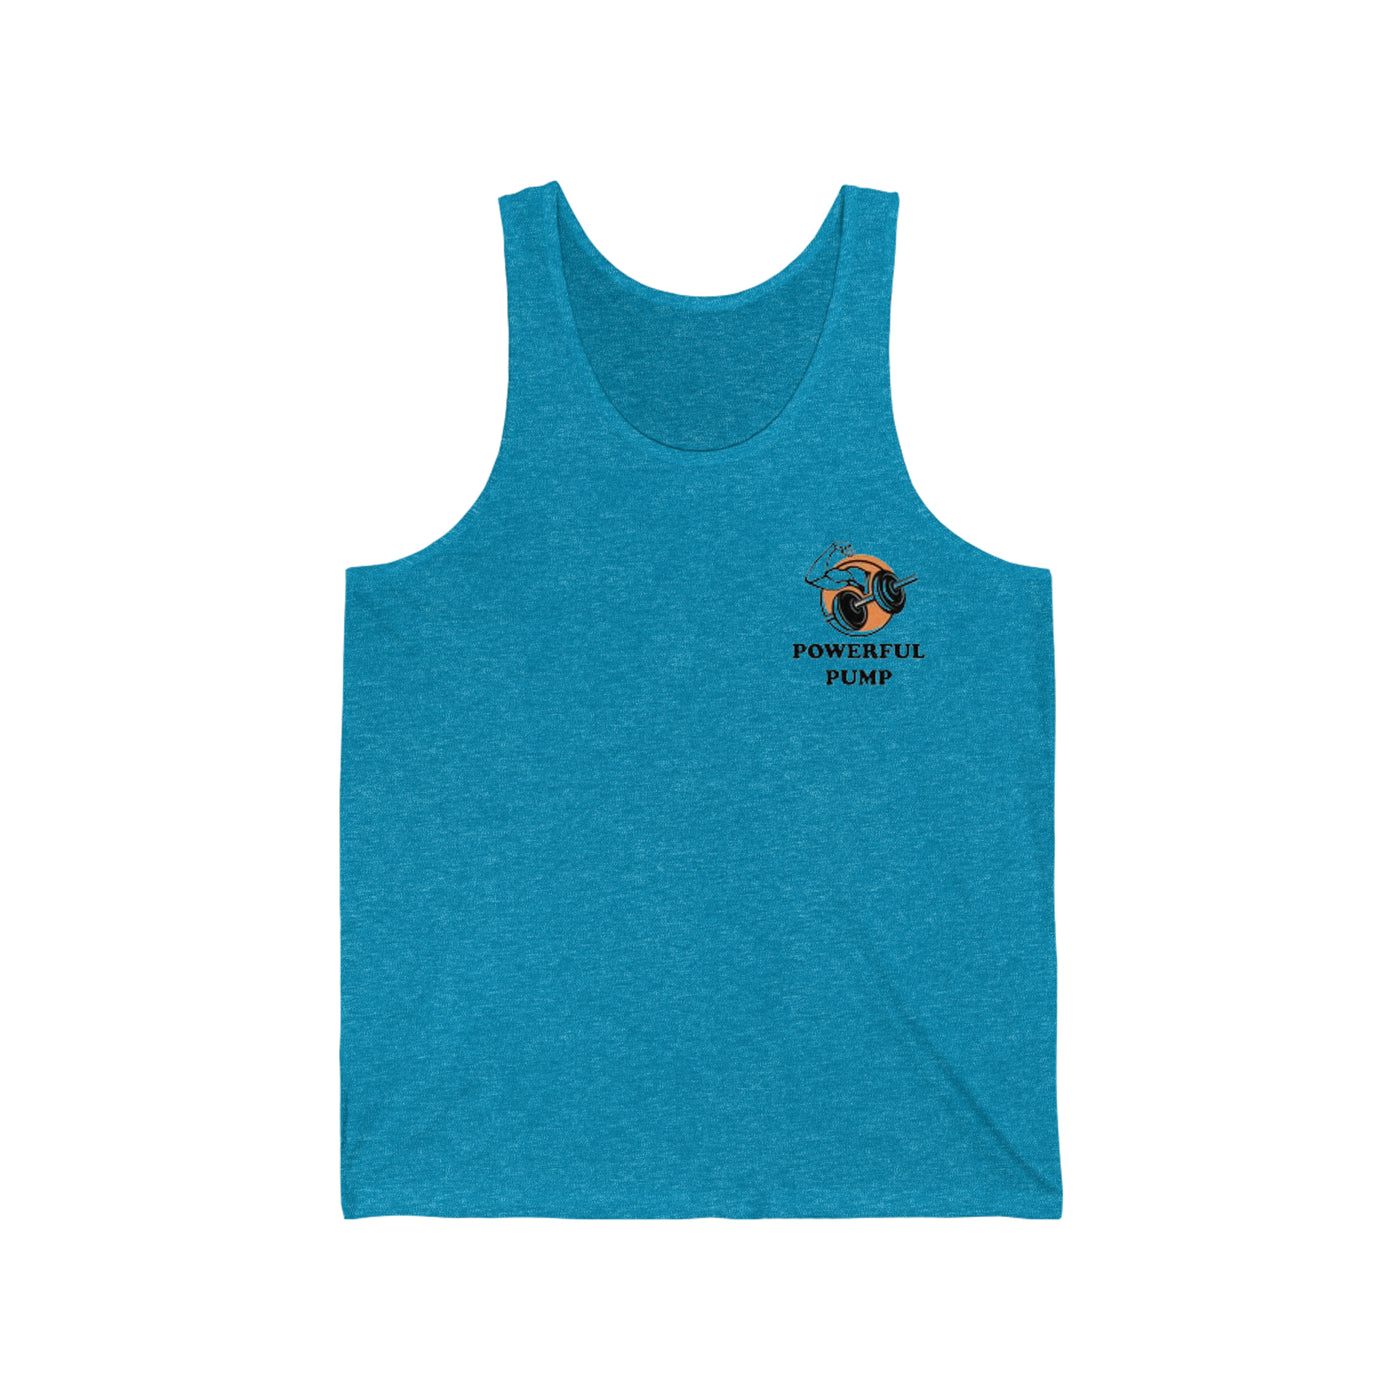 Unisex Fitness Tank - Sleeveless and versatile tank top suitable for both men and women during various fitness activities and workouts.